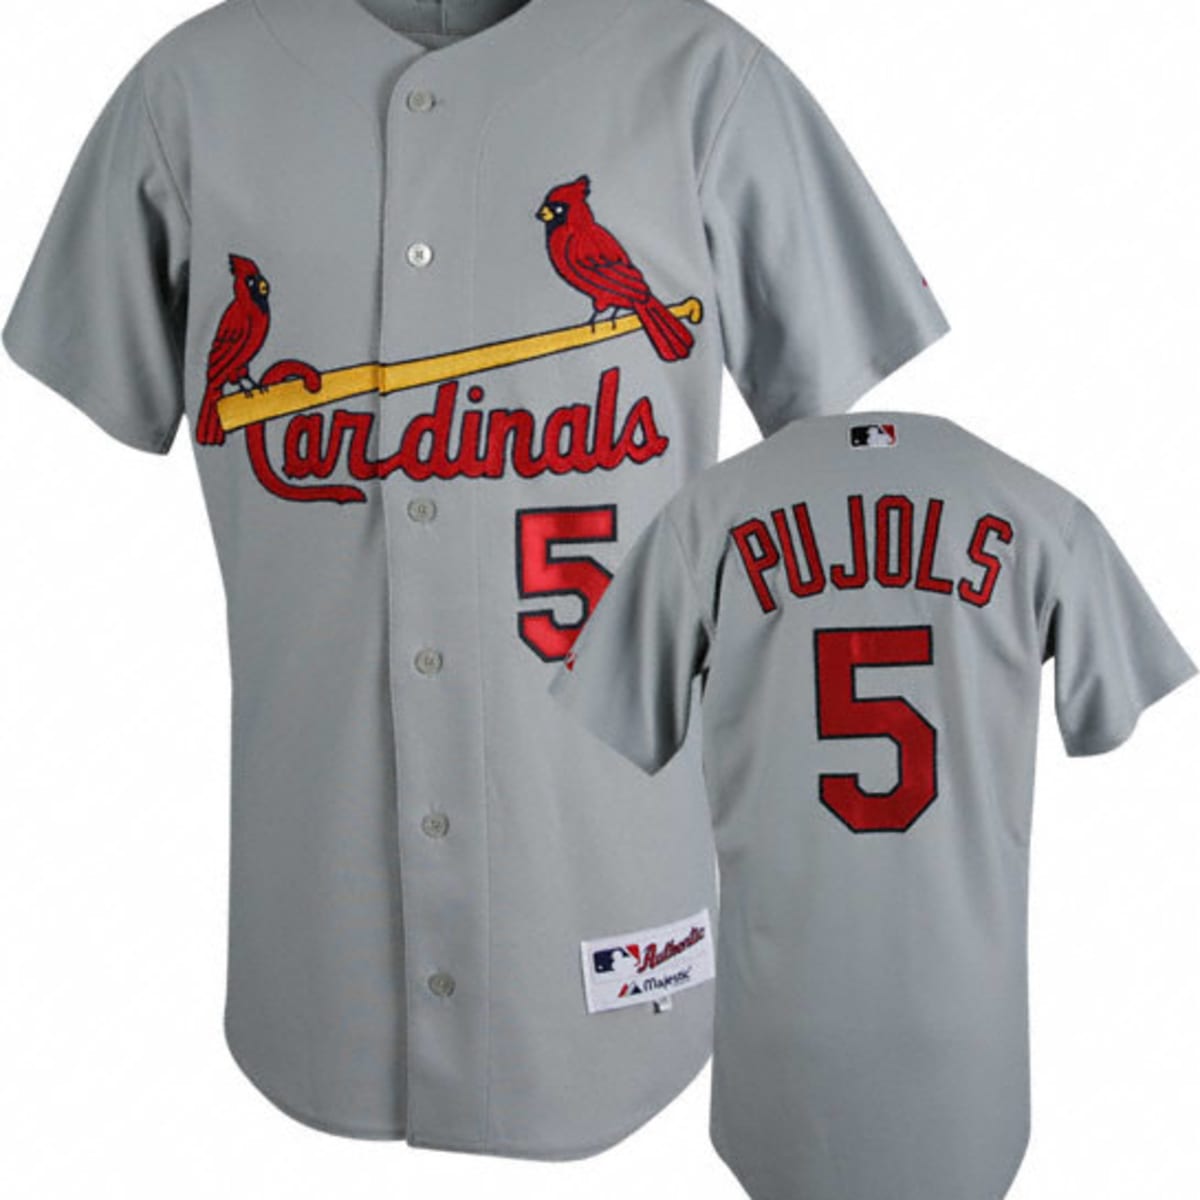 Is Your Authentic MLB Jersey Real? Buying Majestic Baseball Jerseys Online  - HubPages